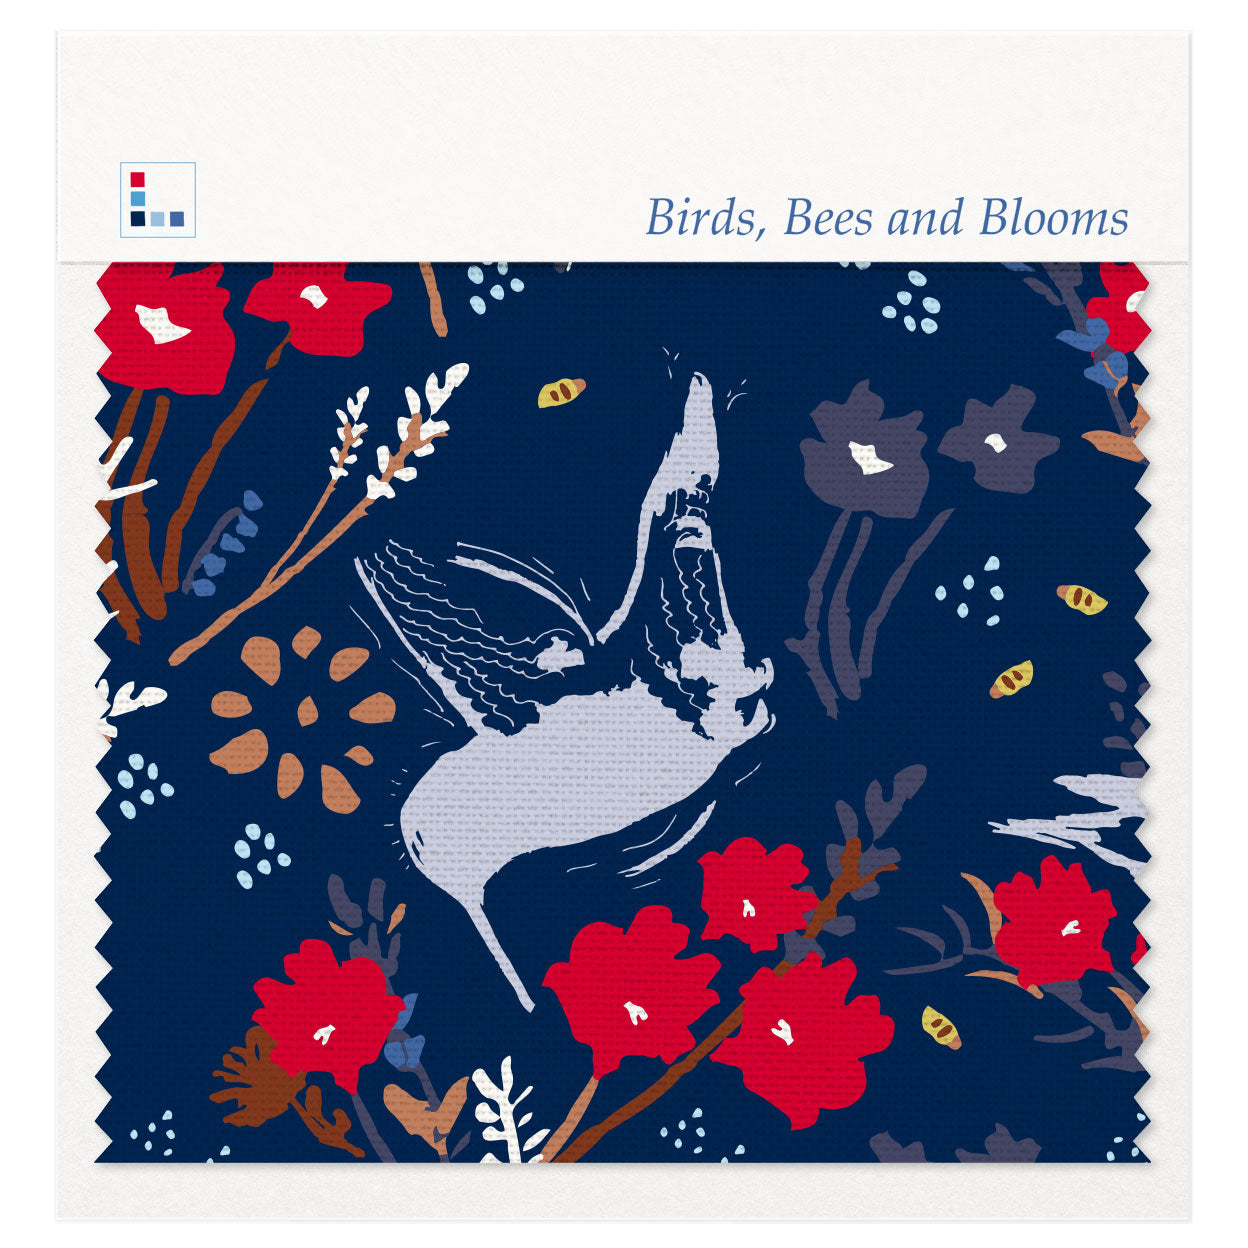 Five Patch Design Birds Bees and Blooms fabric swatch